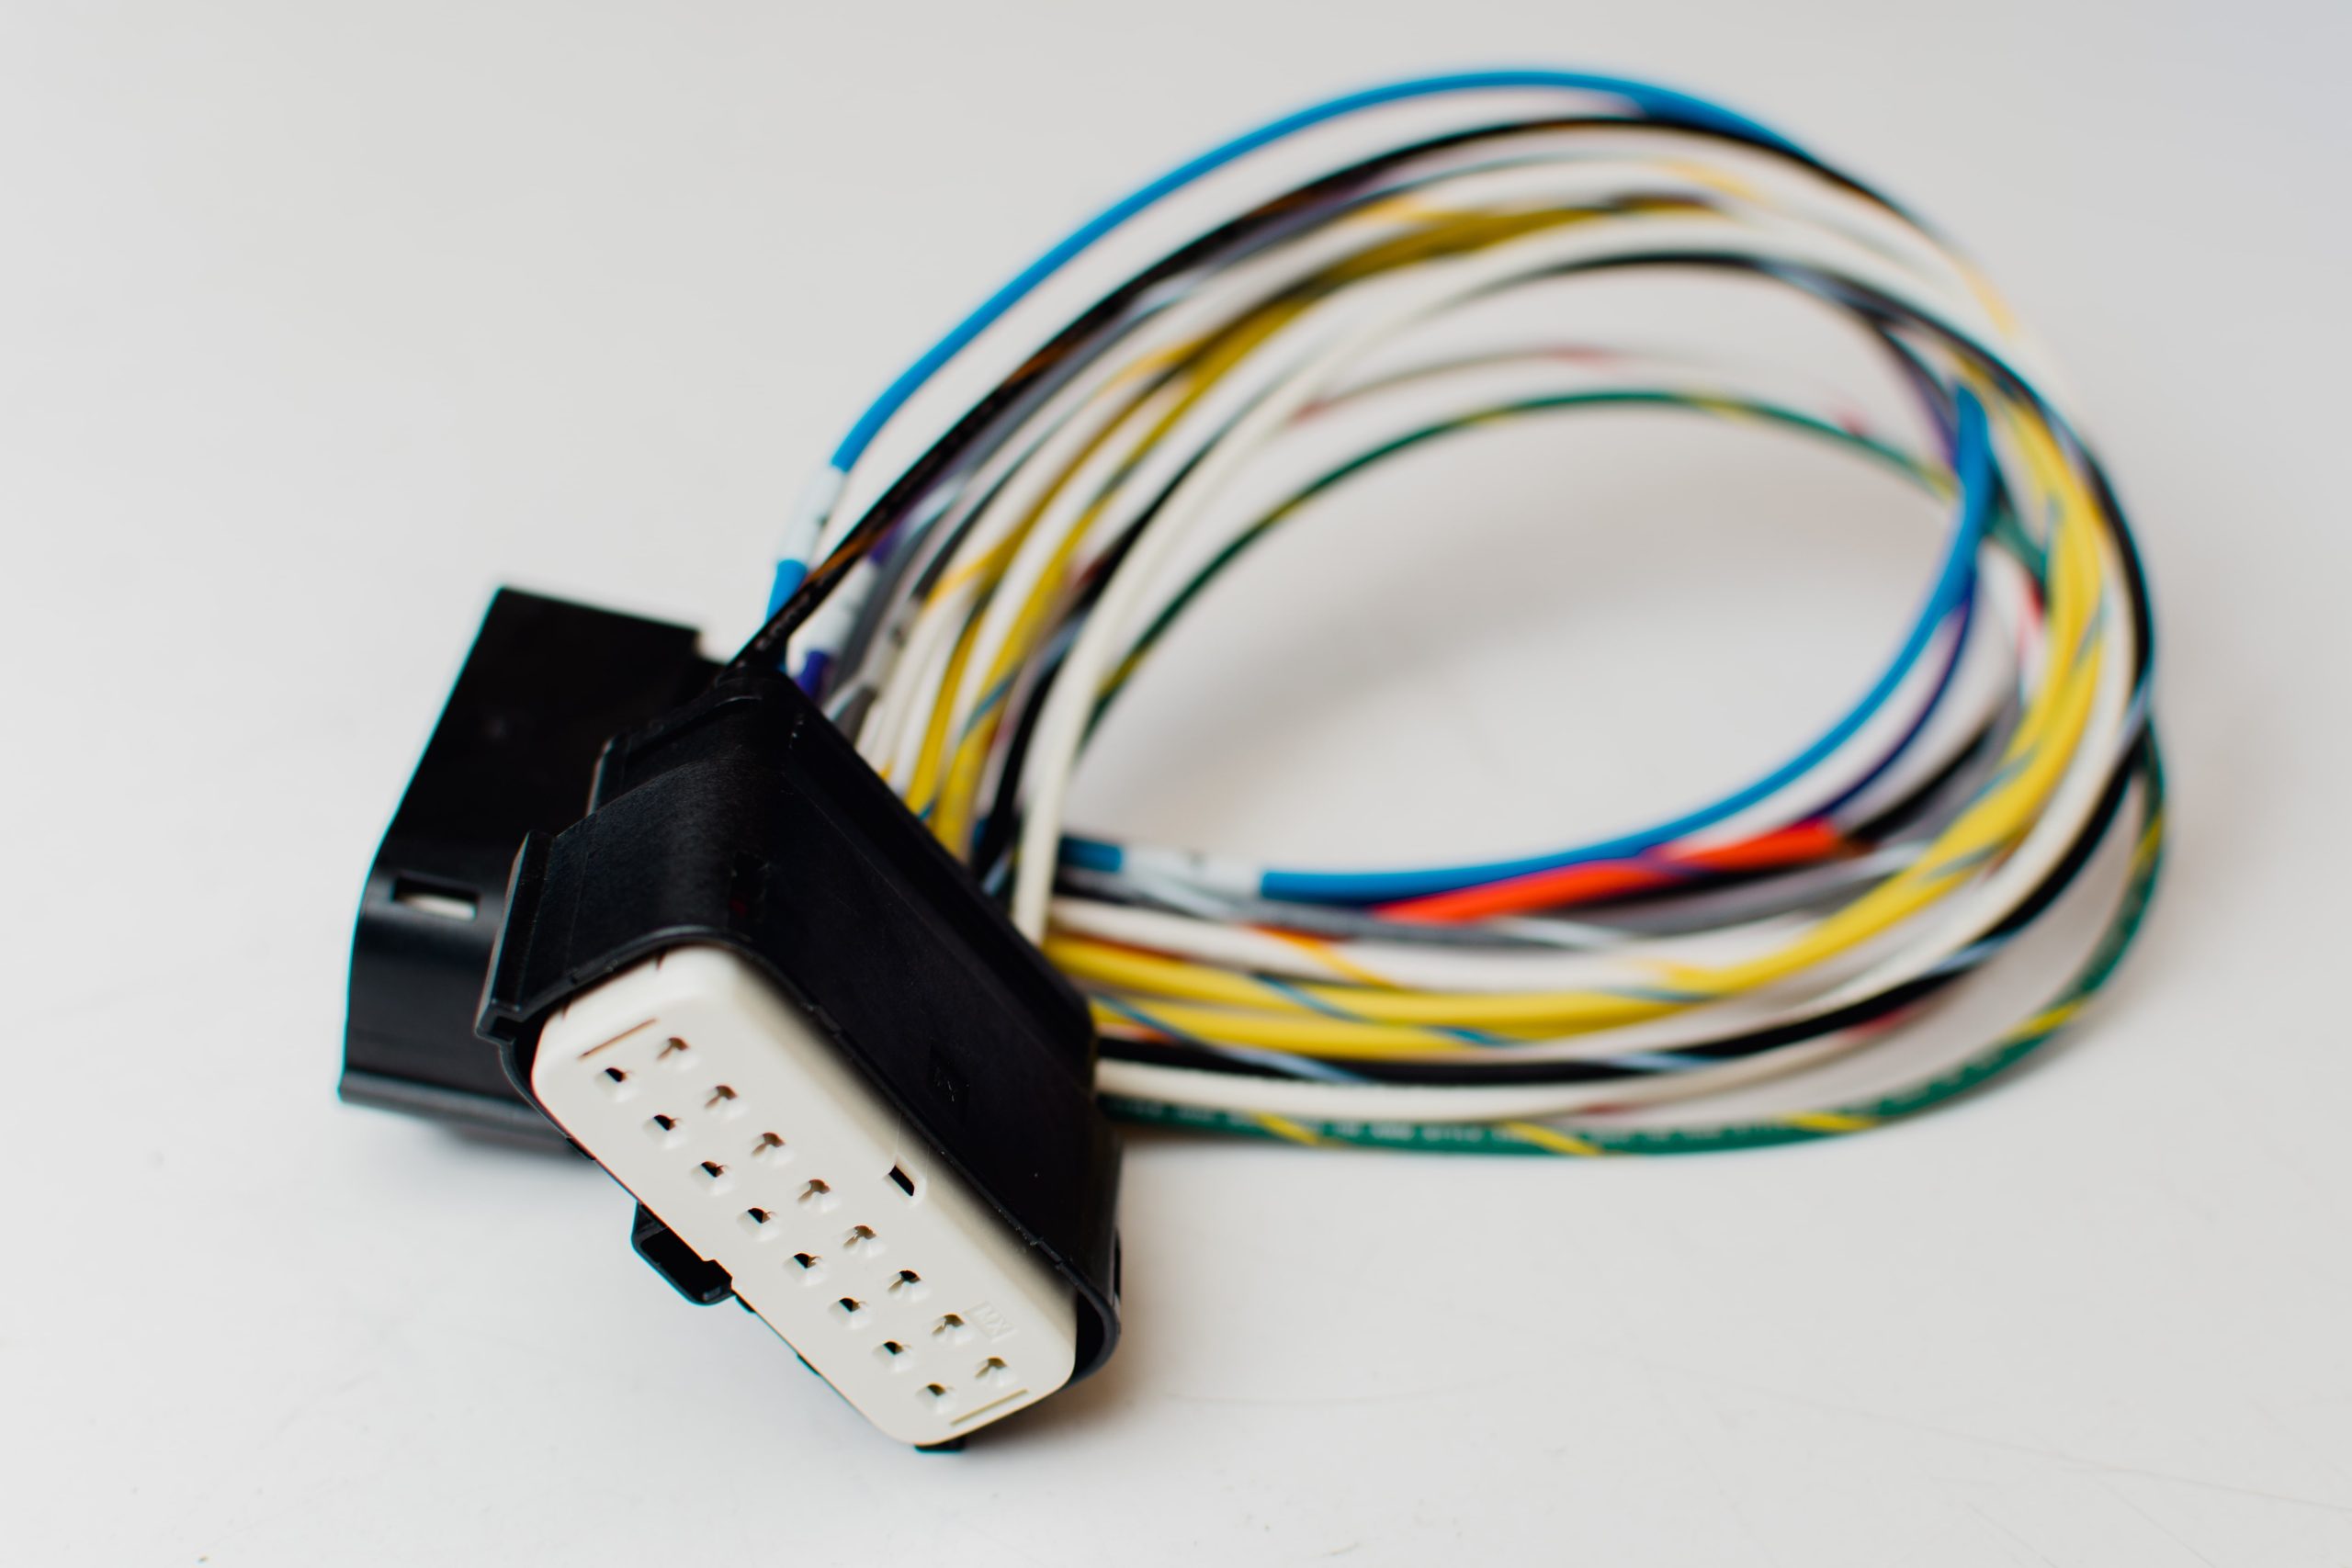 10 Top Advantages Of Using a Wire Harness